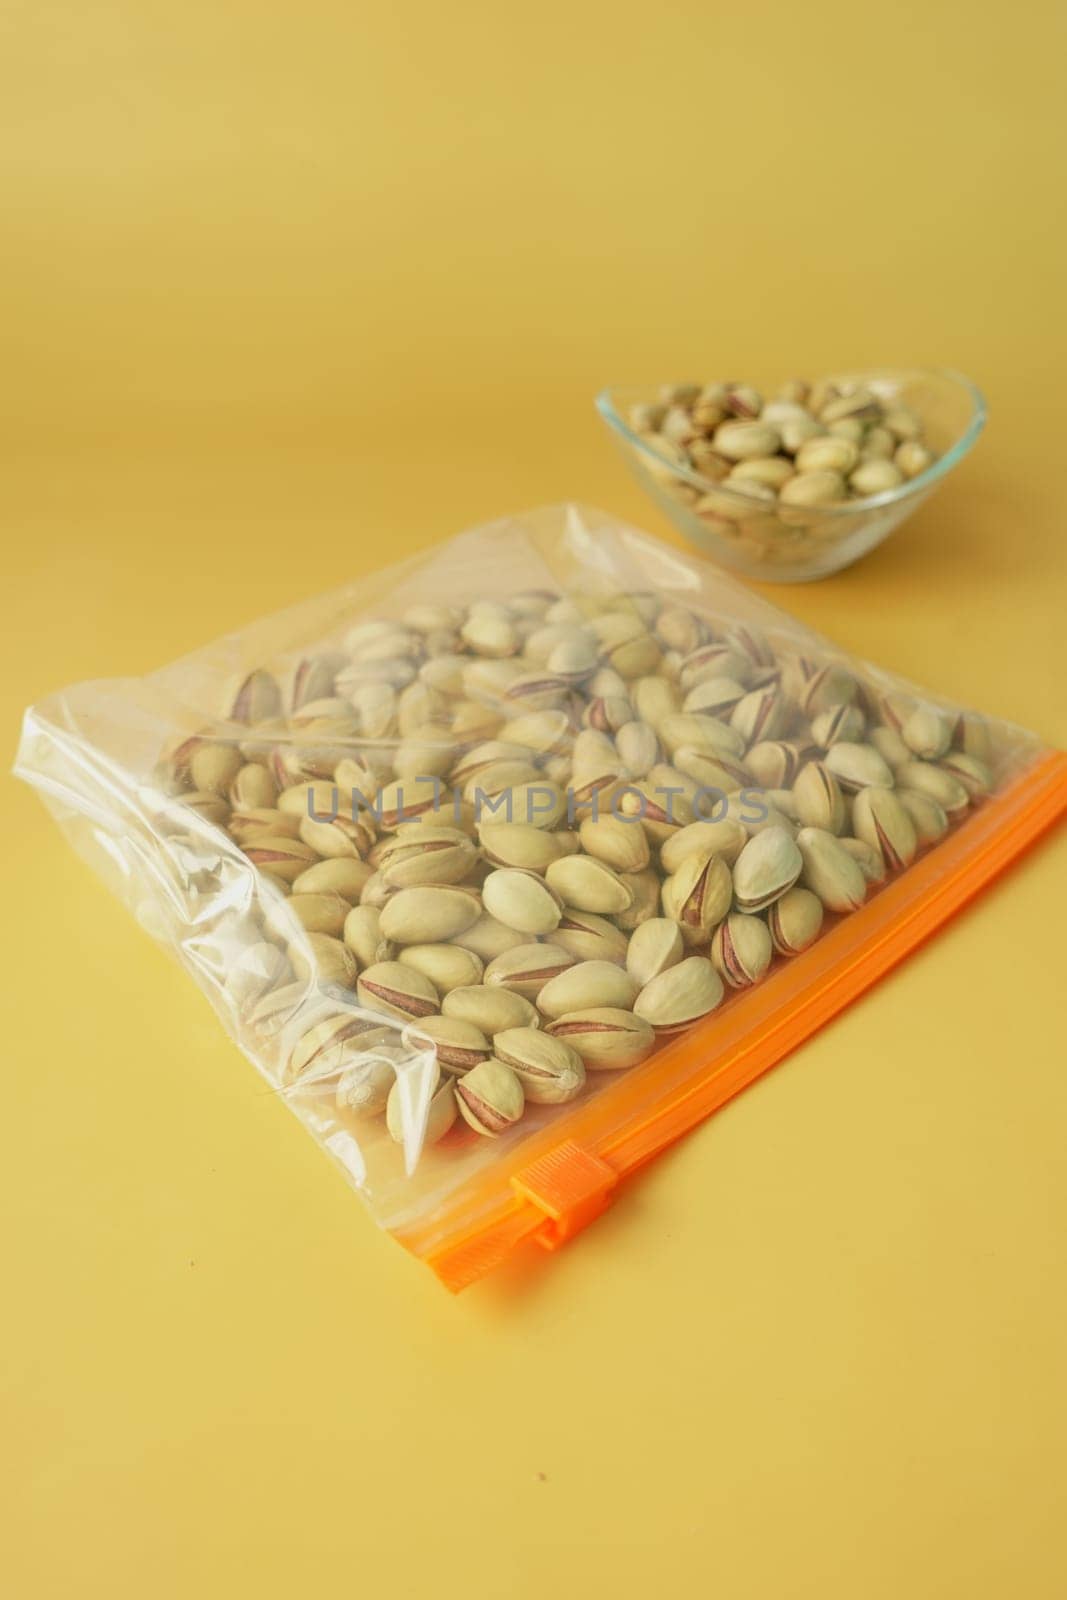 pistachios nuts in a plastic bag on color background by towfiq007